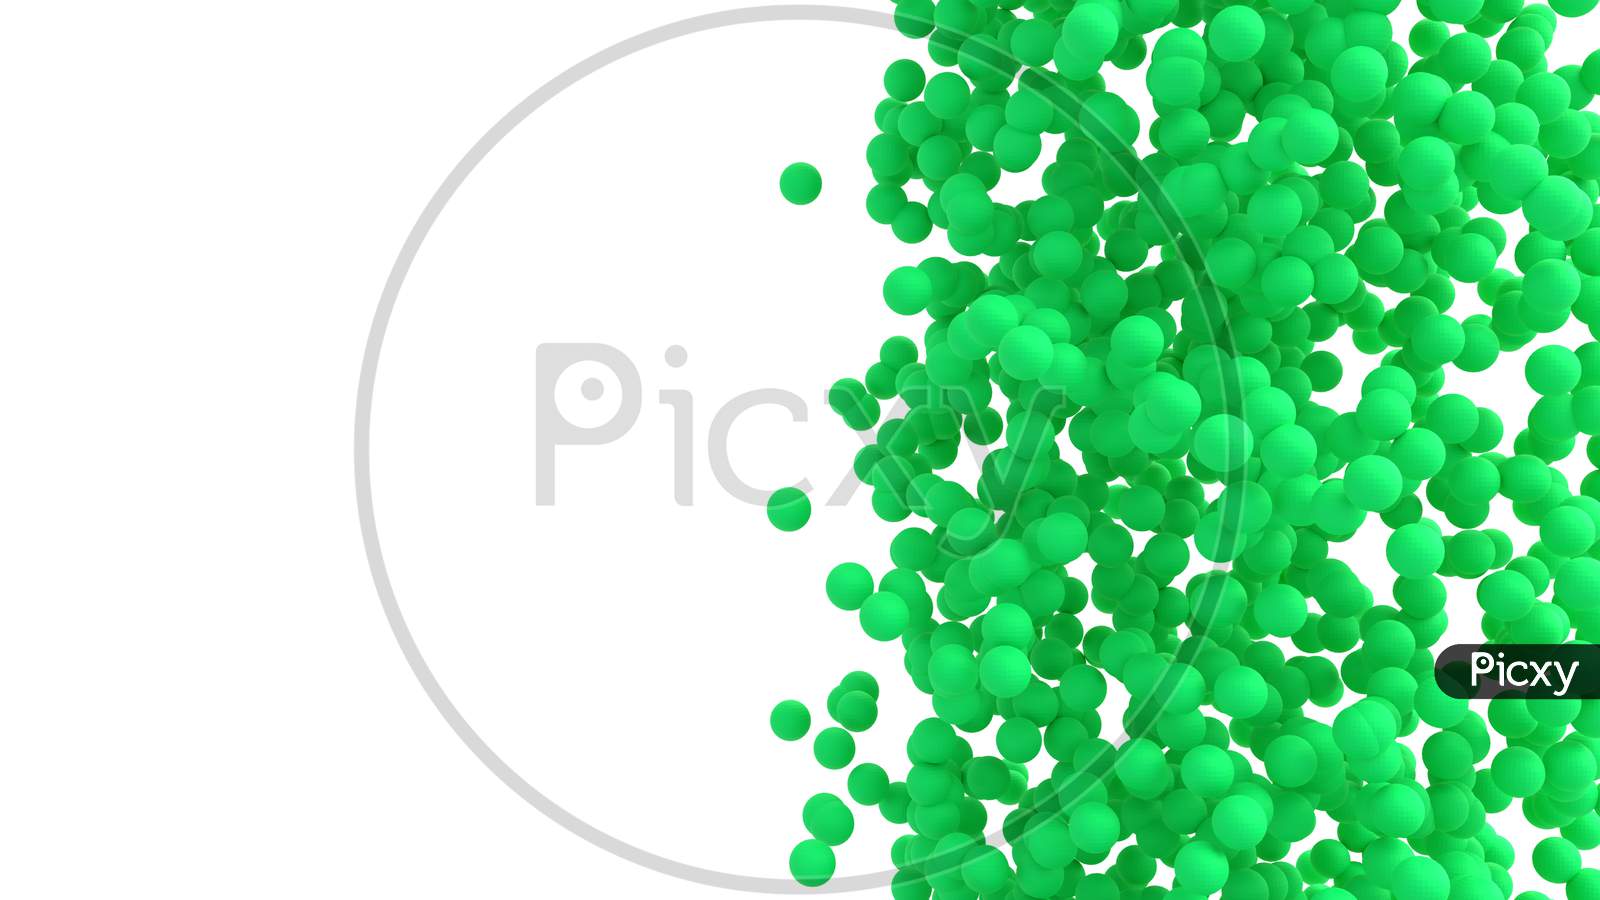 Green Balloons Floating On White Isolated Background. Decoration And Celebration Party Concept. Saint Patrick'S Day And Funny Event Theme. 3D Illustration